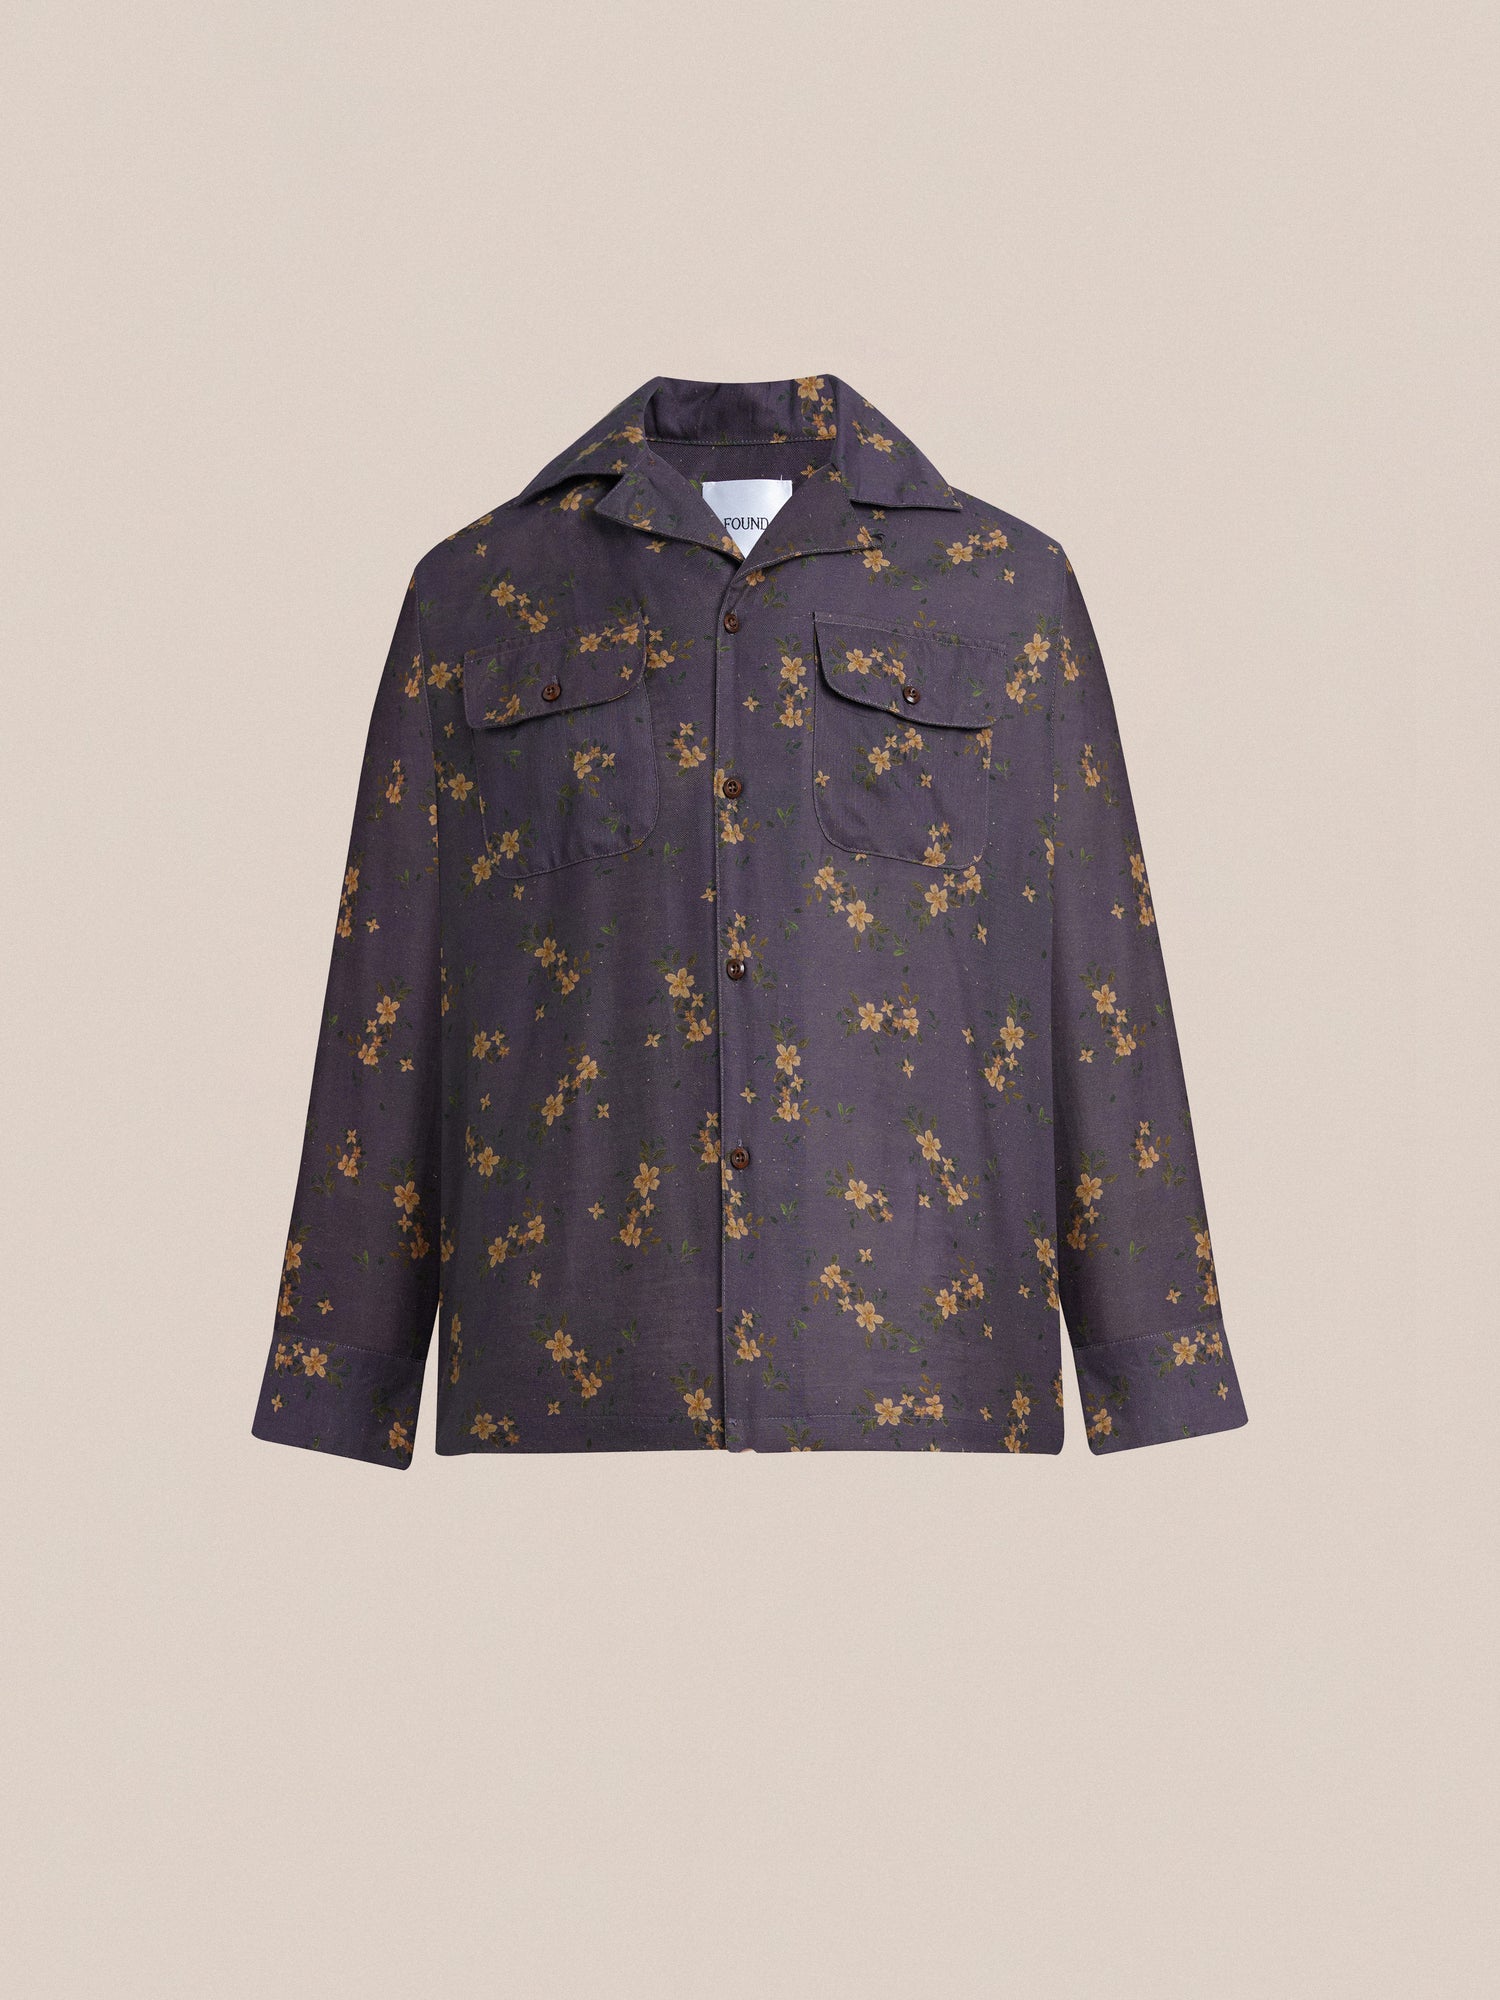 A Dusty LS Camp Shirt from Found with a flower print on it, offering a classic appeal.